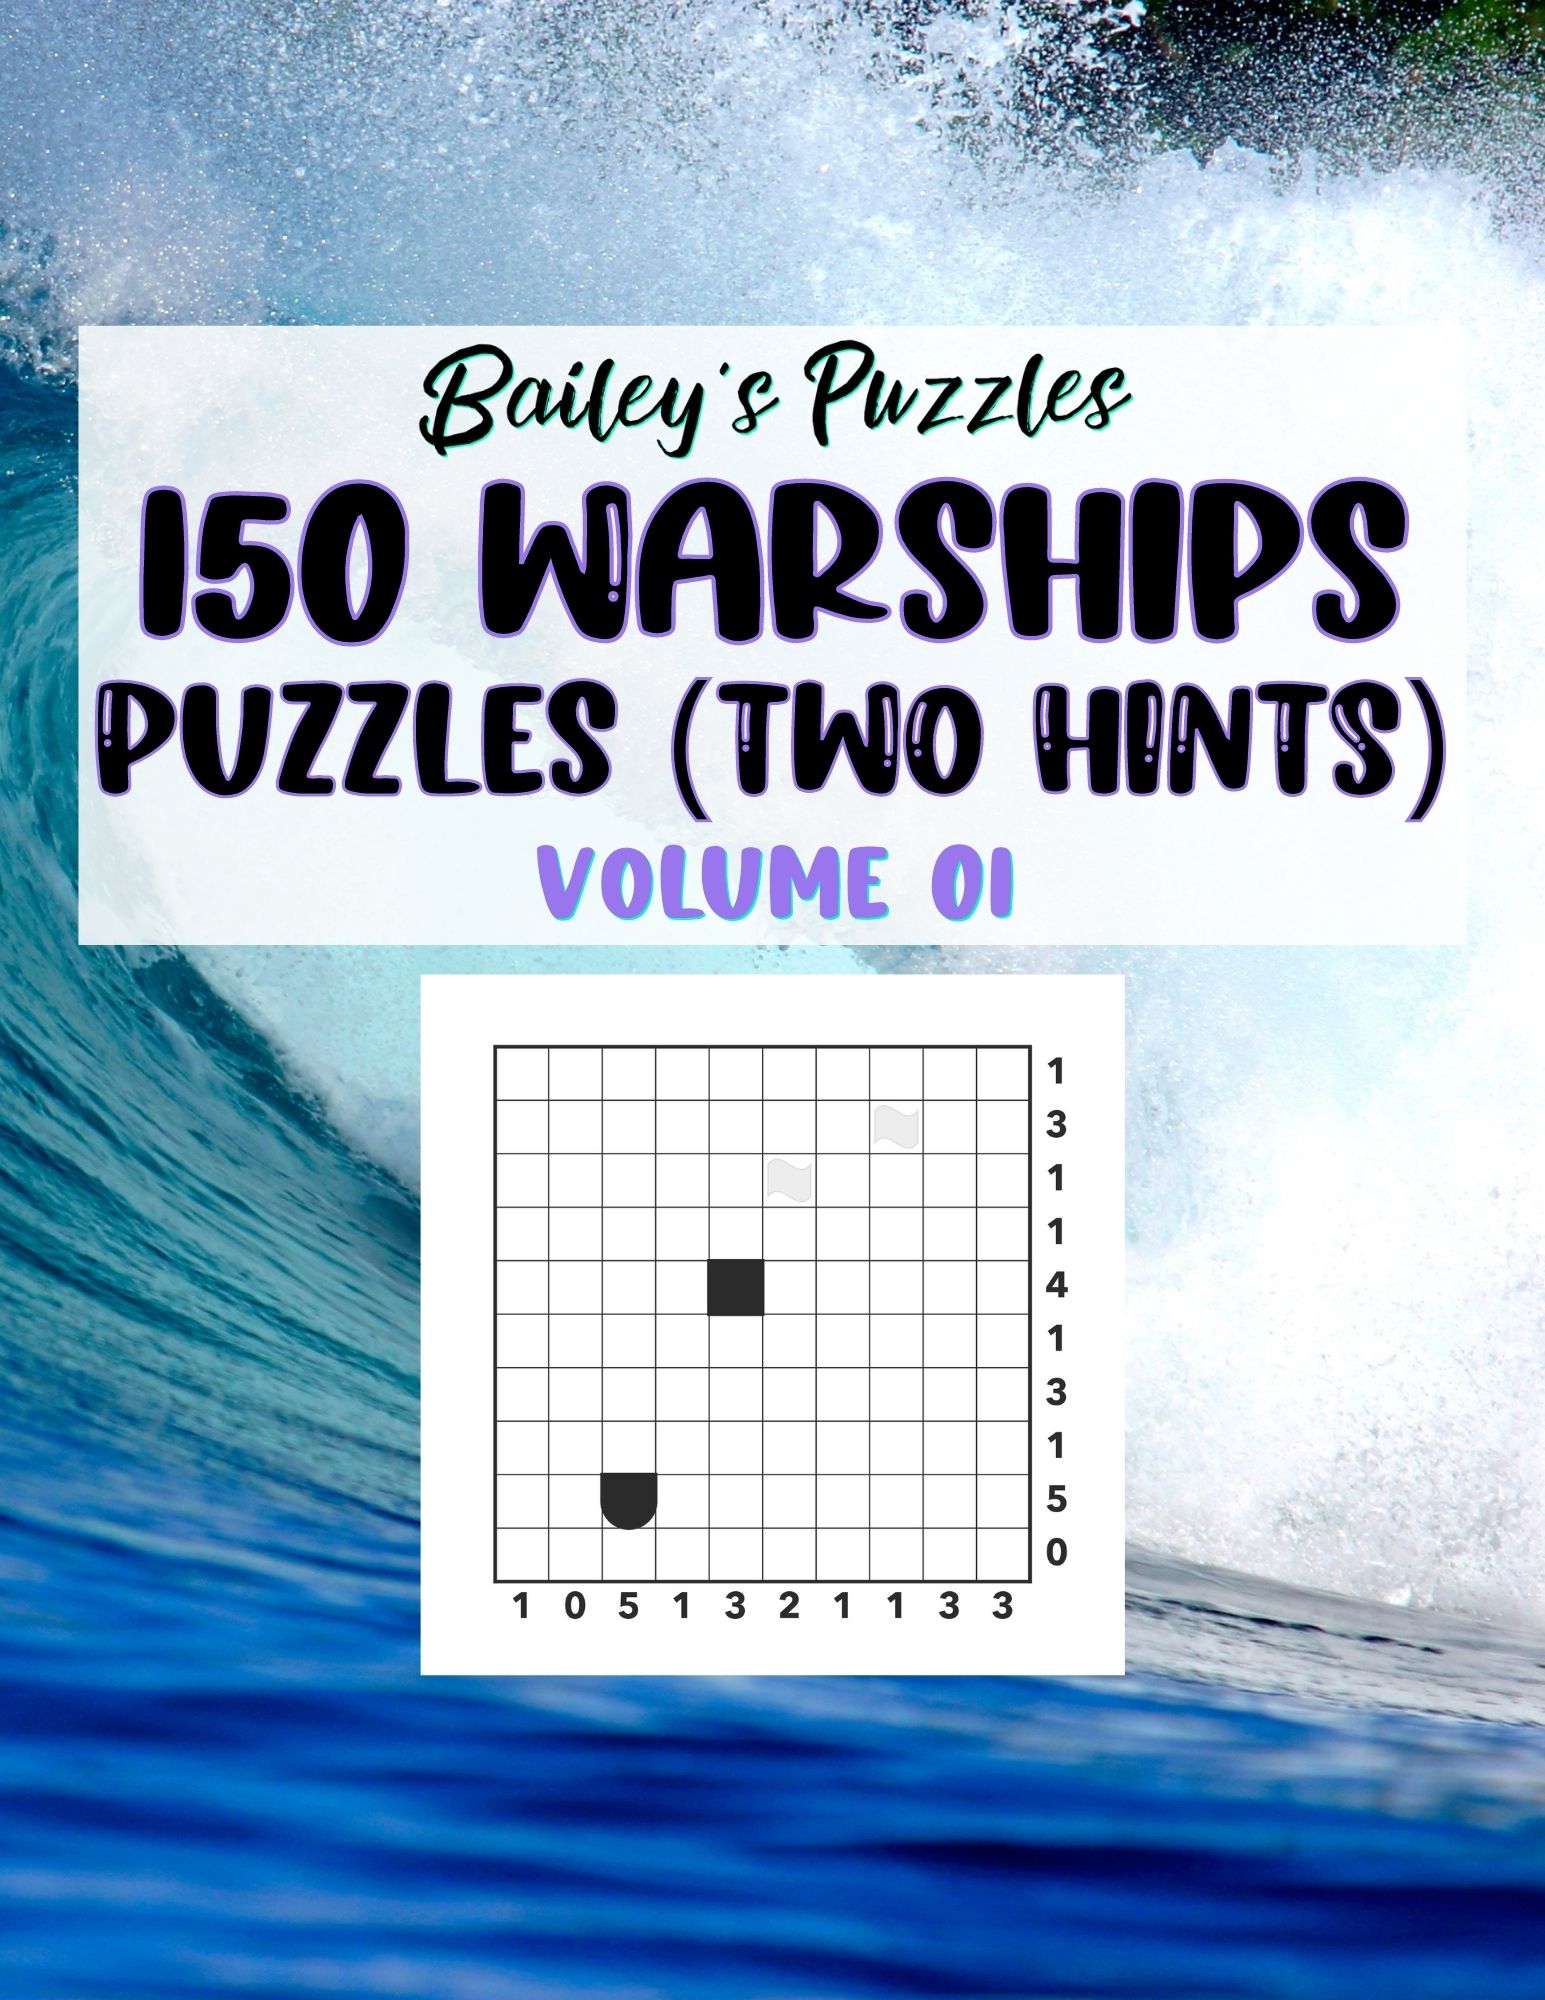 Front Cover - 150 Warships Puzzles (2 hints)